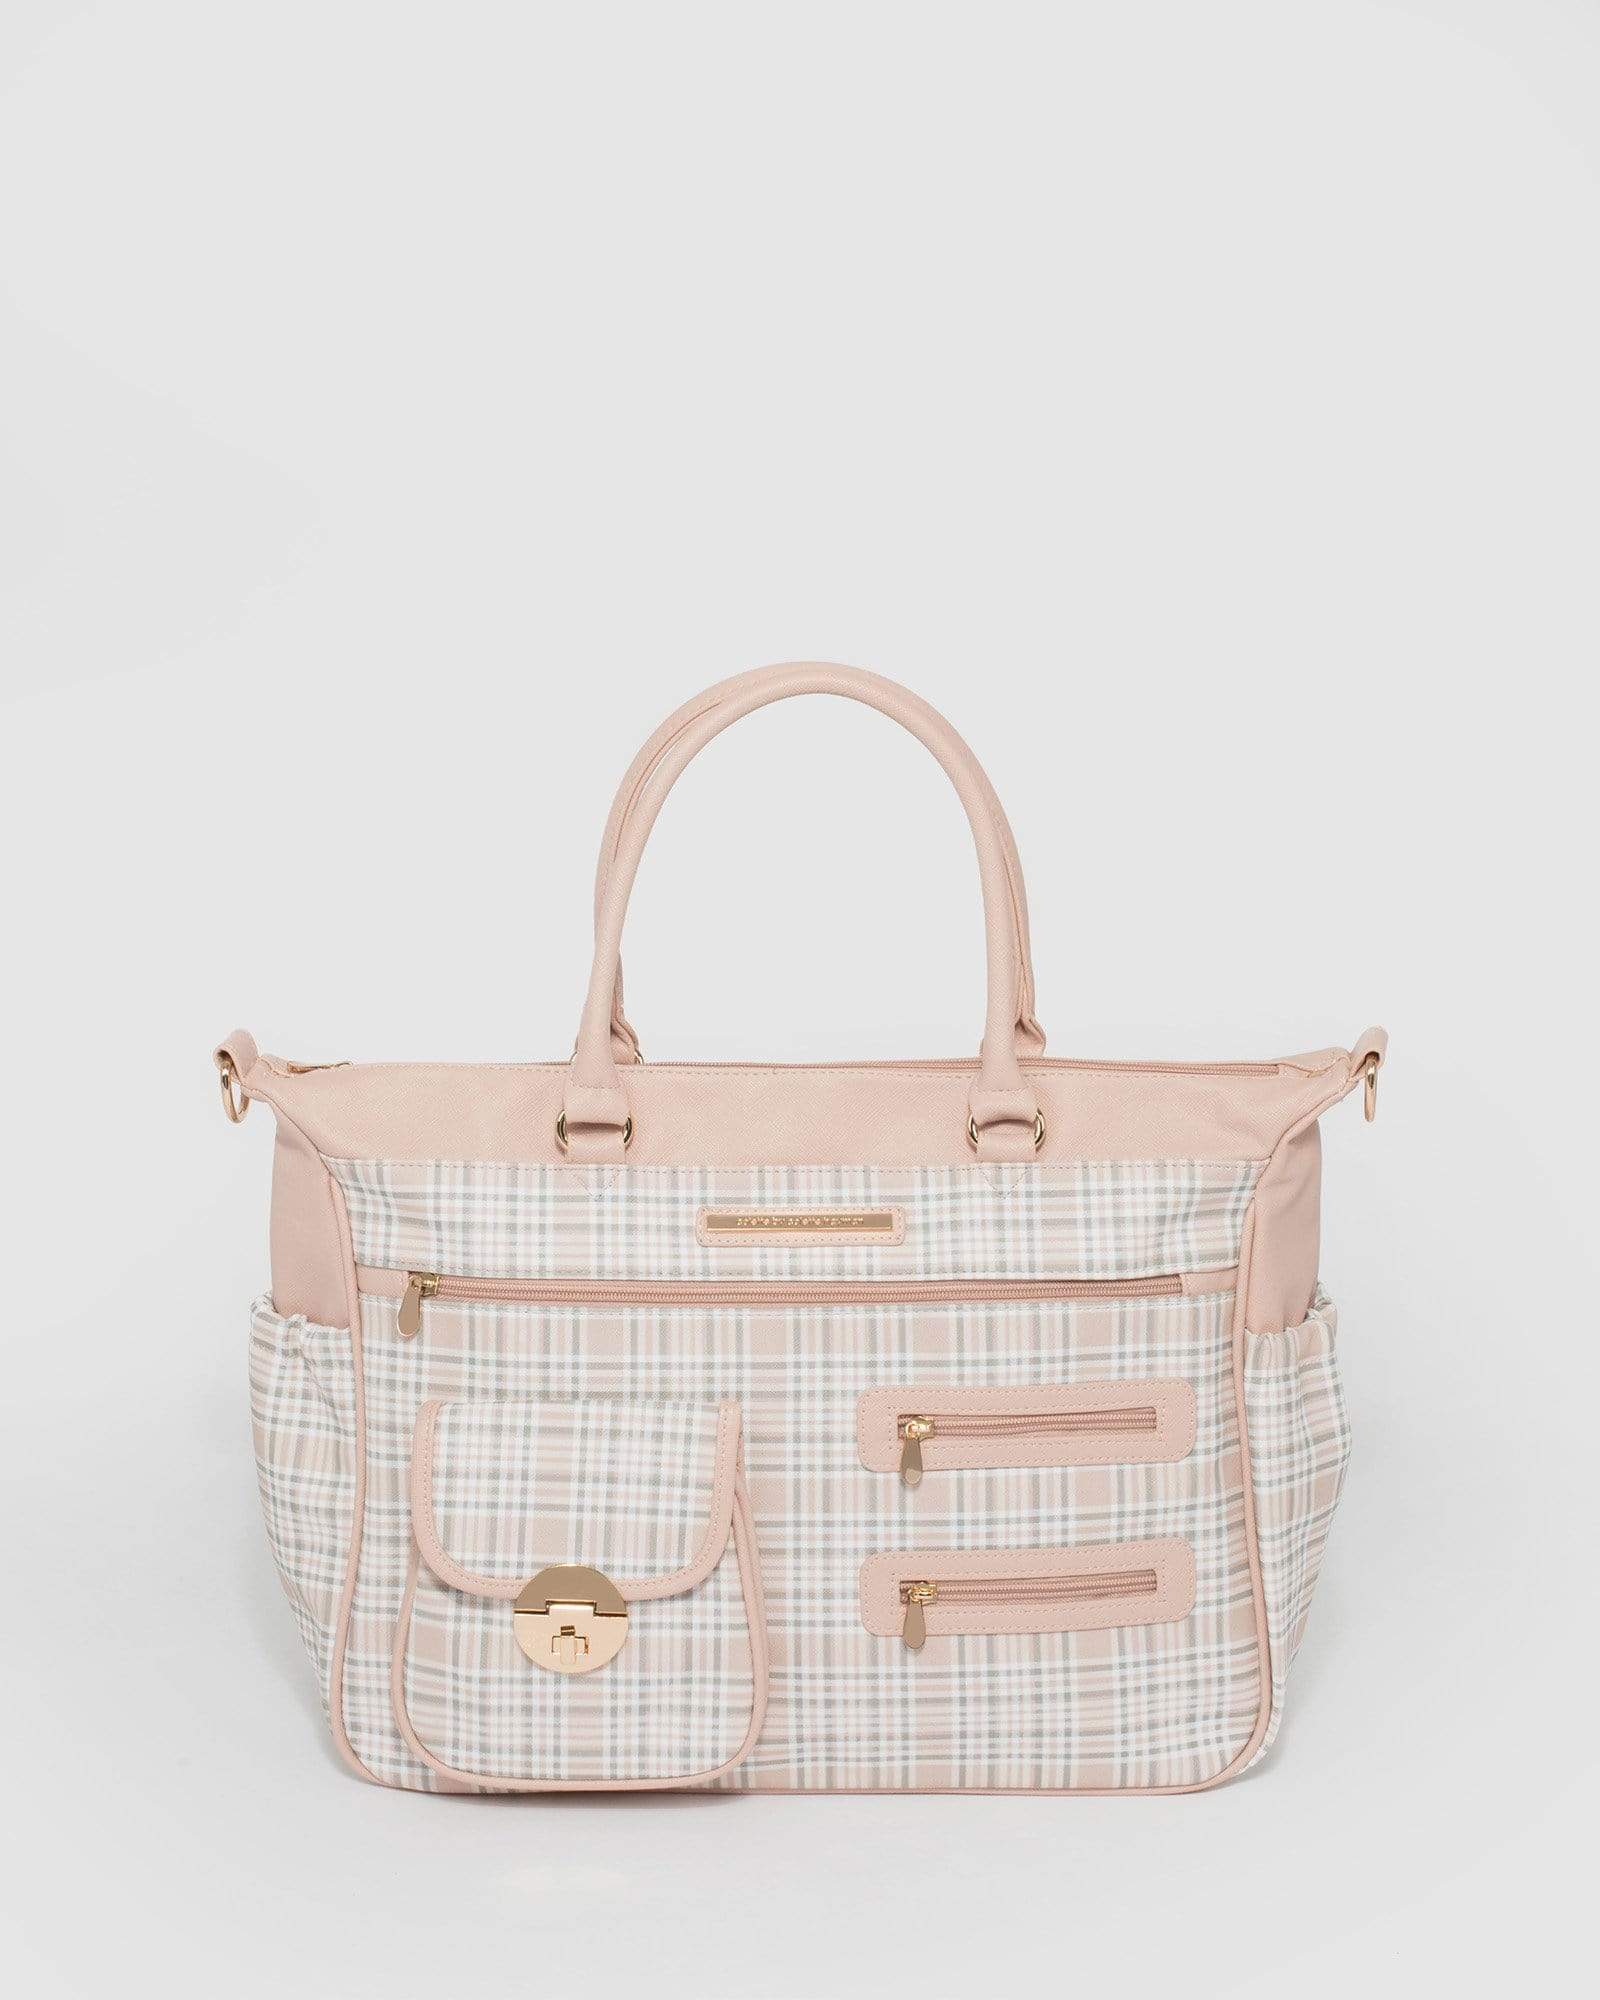 Colette bag in white cotton and pink canvas – Suit Negozi Row